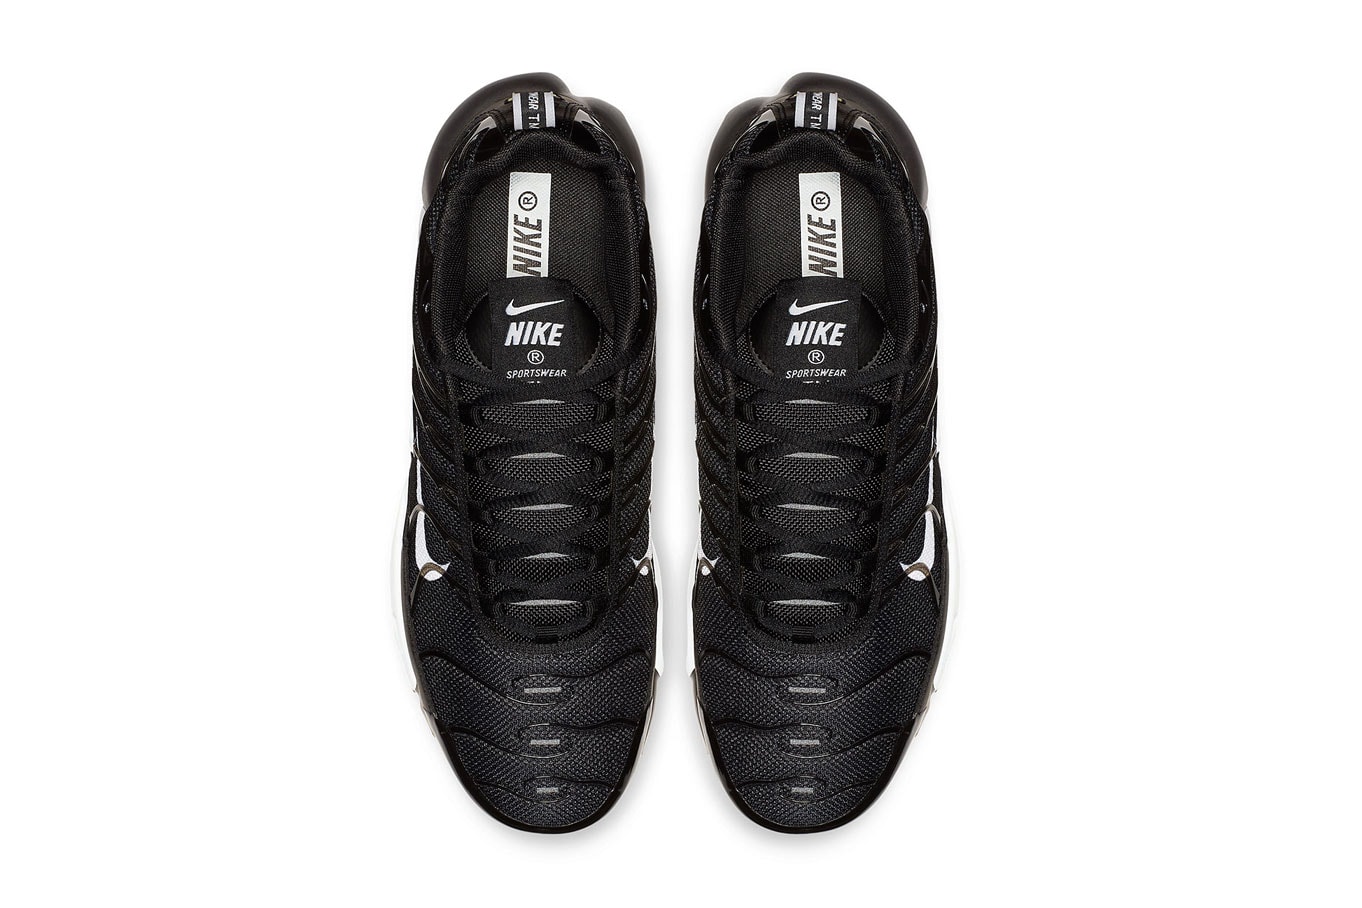 Nike Air Max Plus "Overbranded" Double Swoosh black white colorway sneaker series pack logo price info release date